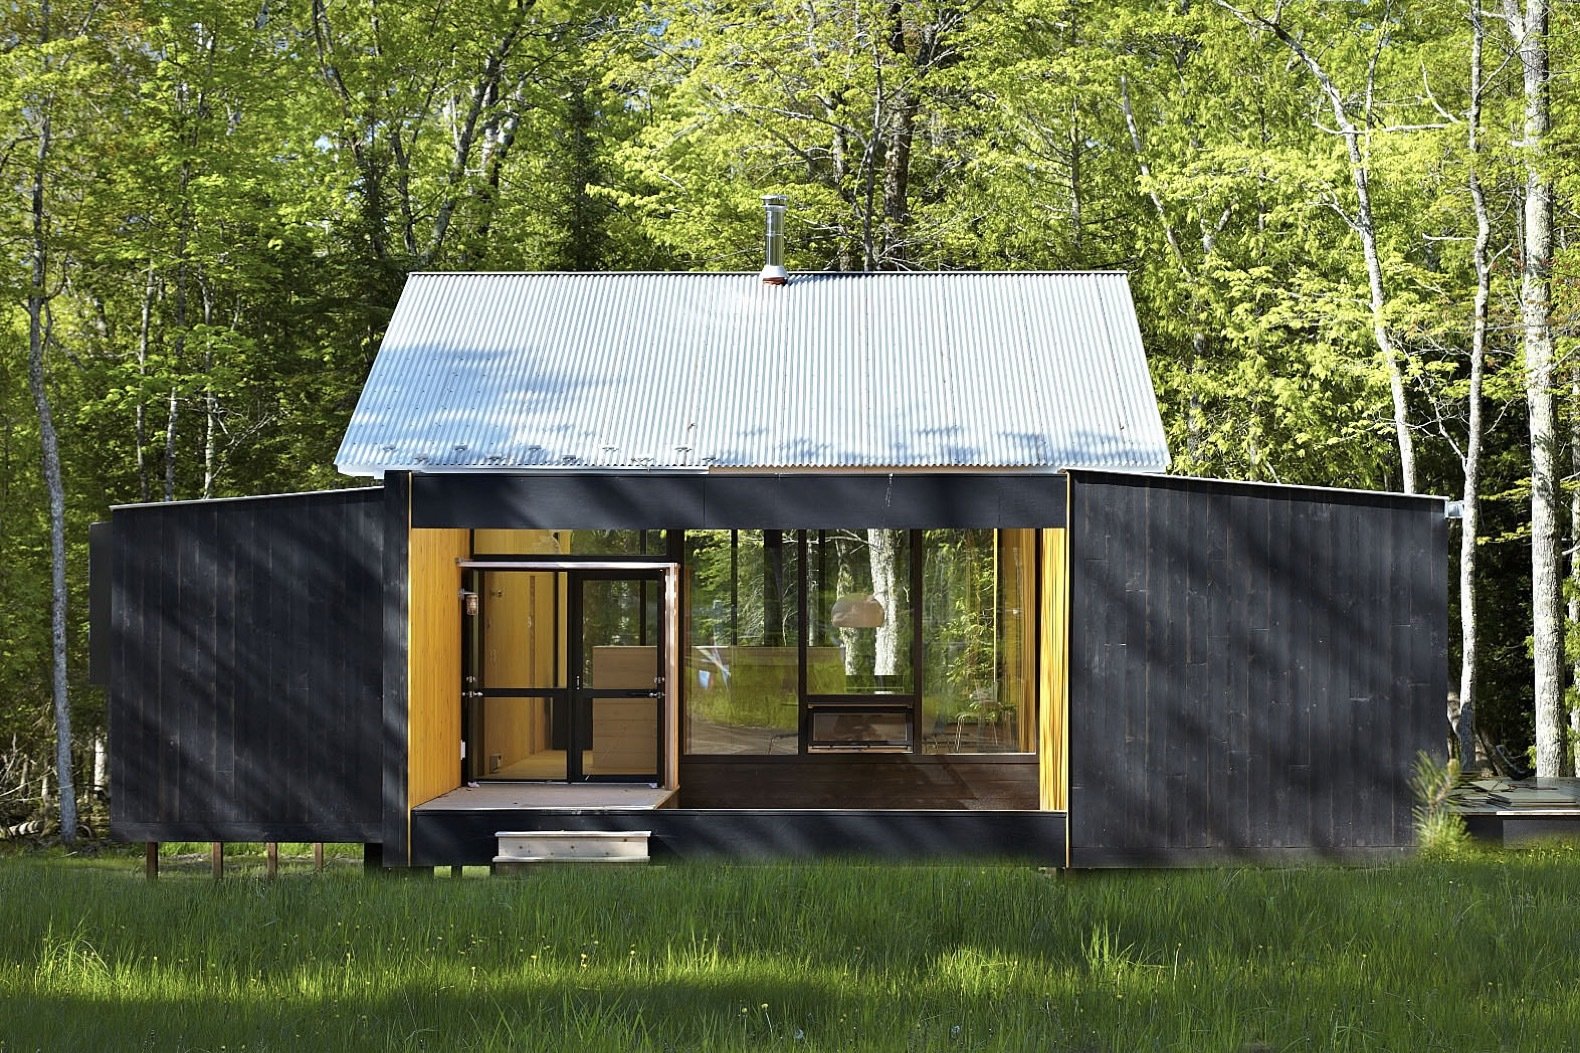 This Prefab Cabin Offers an Affordable Answer to Island Construction